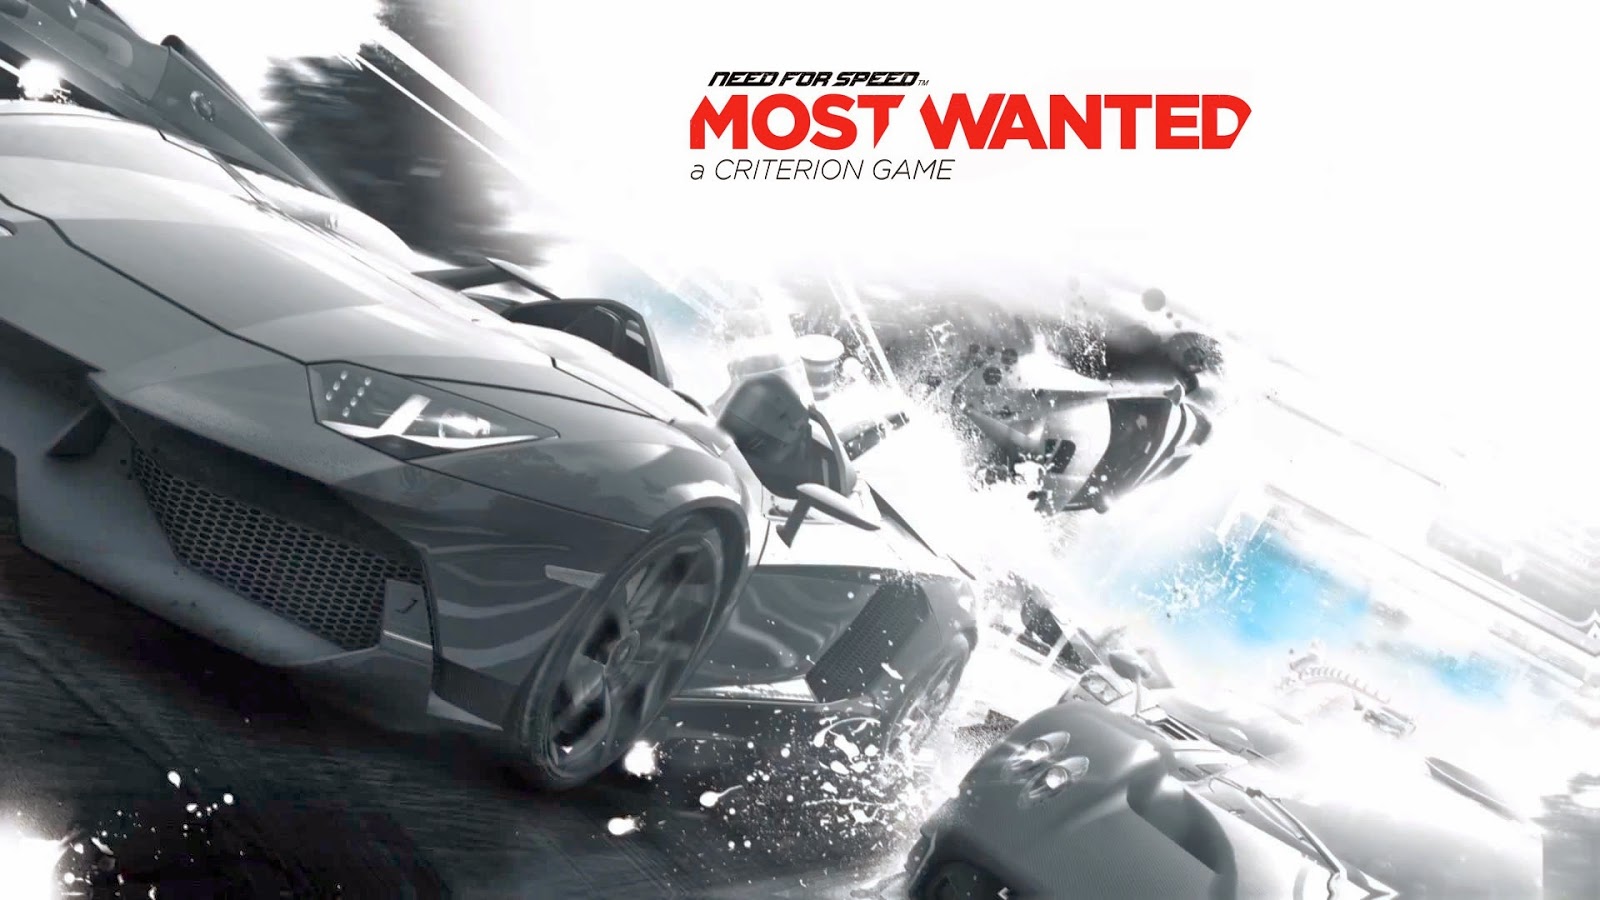 Need For Speed Most Wanted Wallpaper HD Deloiz